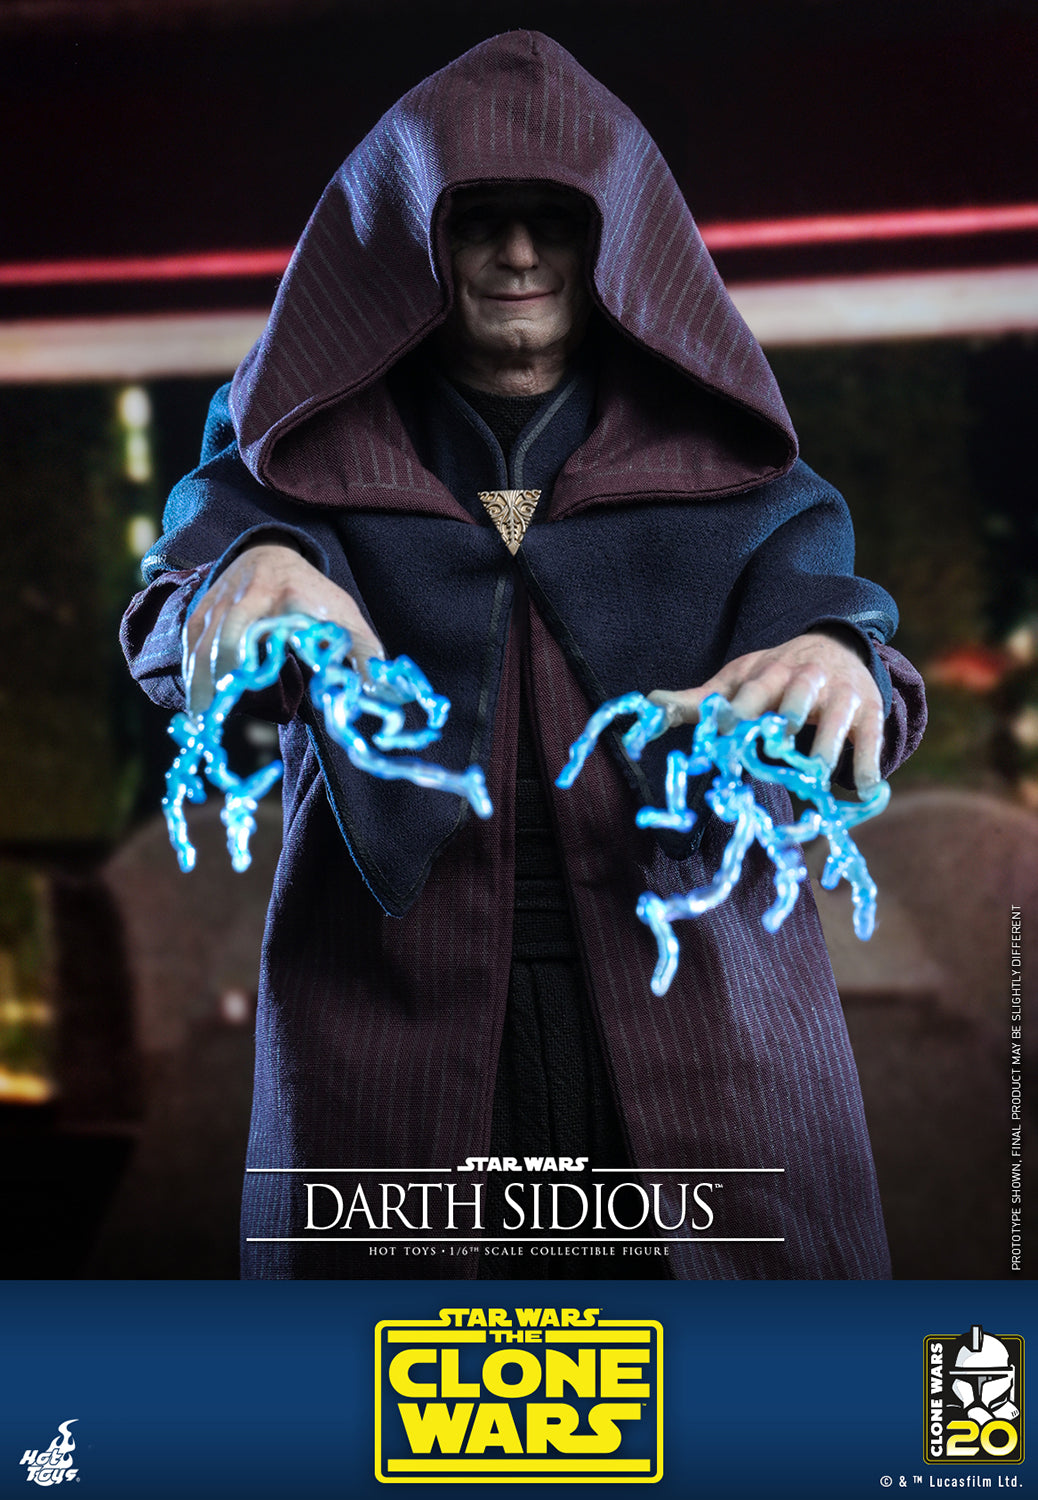  Darth Sidious (Star Wars: The Clone Wars) 1:6 Scale Figure by Hot Toys